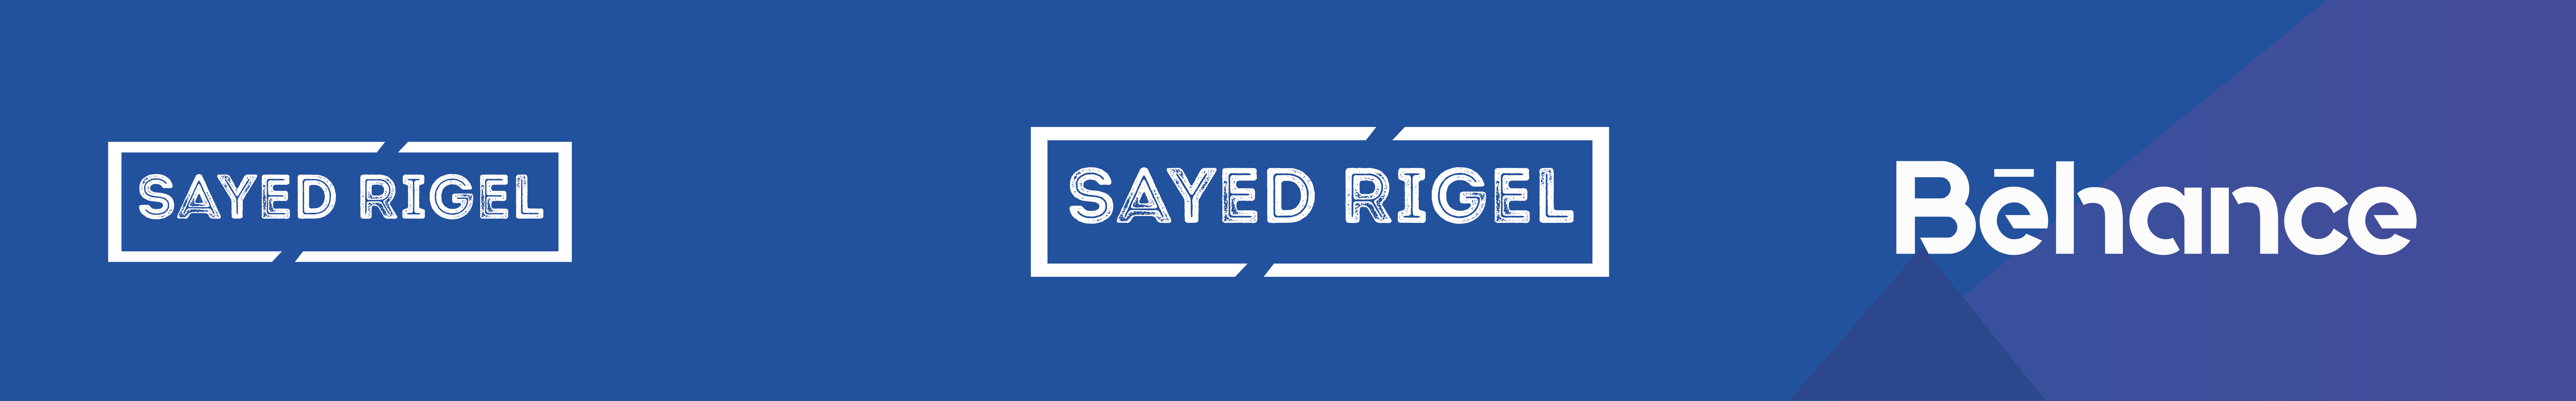 Sayed Rigel's profile banner